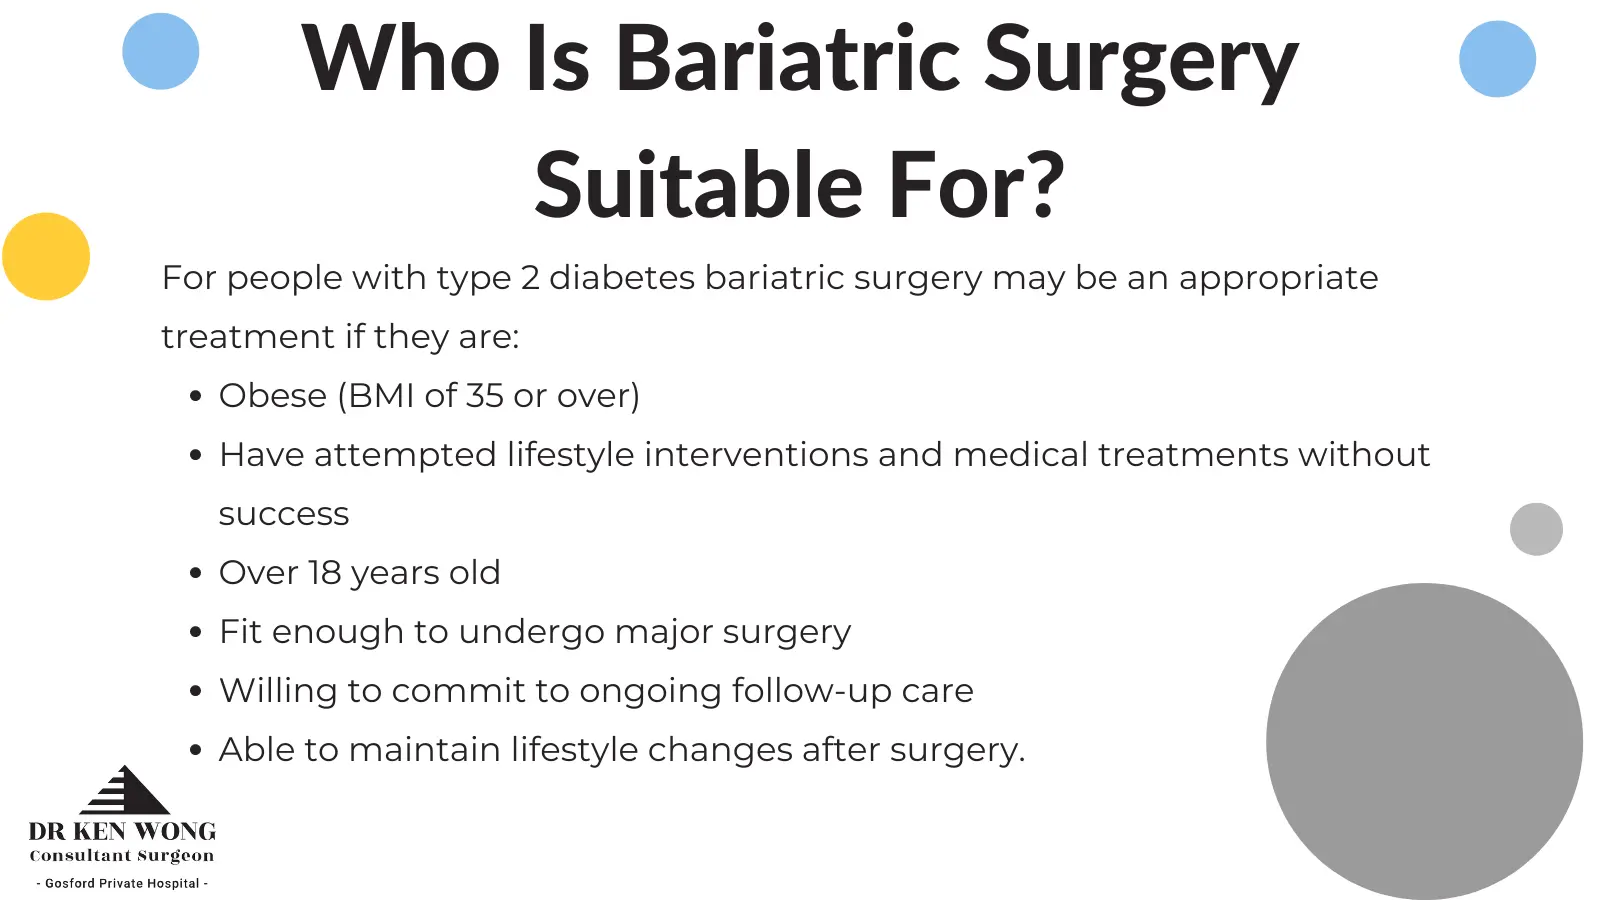 who is bariatric surgery suitable for